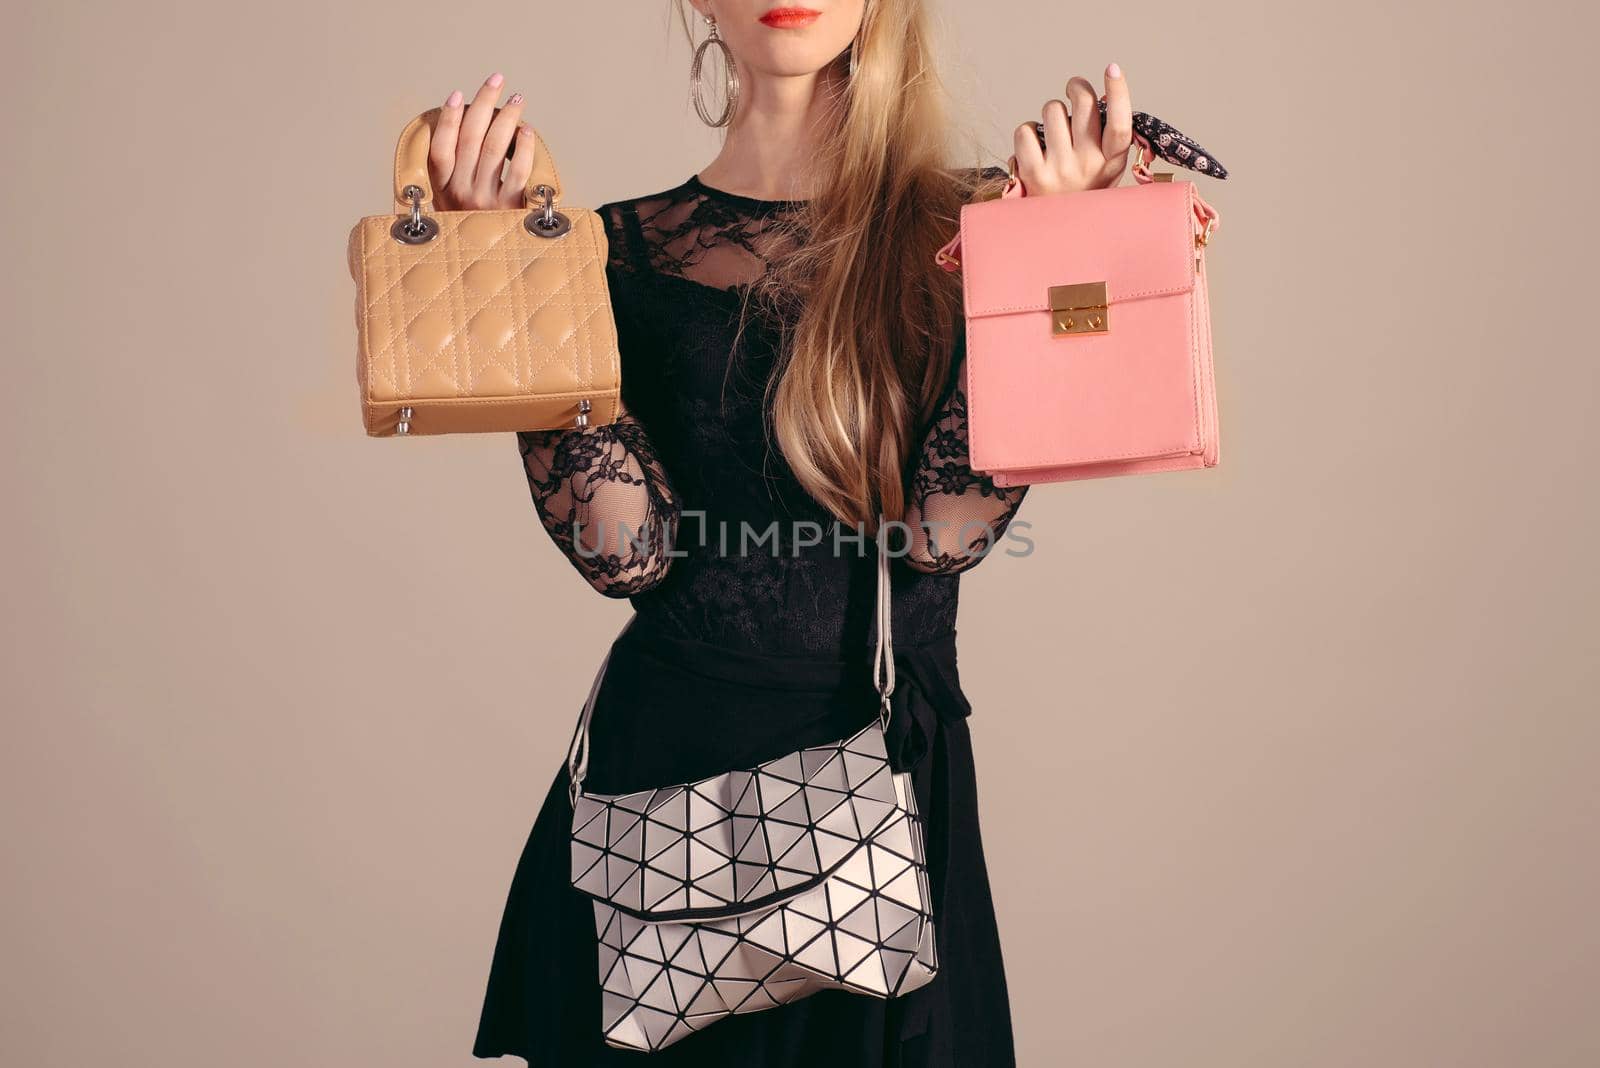 Young woman posing in black dress and three hand bag by zartarn